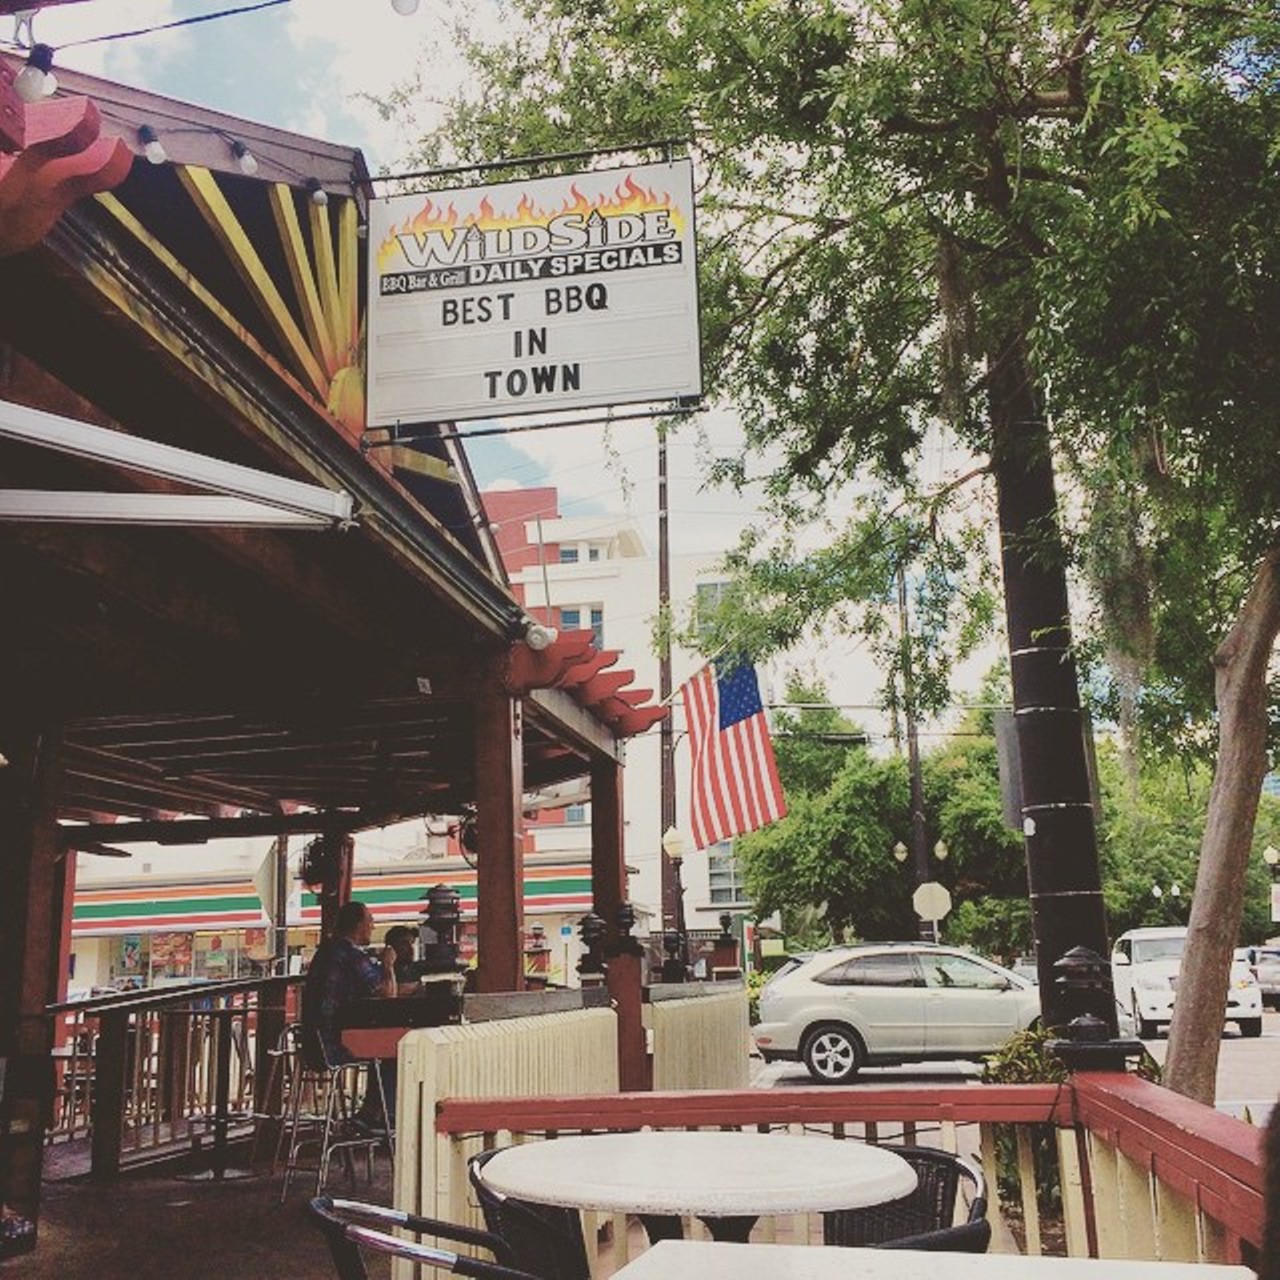 Wildside Bar and Grill
700 E. Washington Street, Orlando
407-872-8665
Wildside BBQ Bar and Grille is your outdoor spot this weekend if you're looking for a place to kick back with drink and some tasty food on a solid outdoor patio. Photo via bredamota on Instagram.